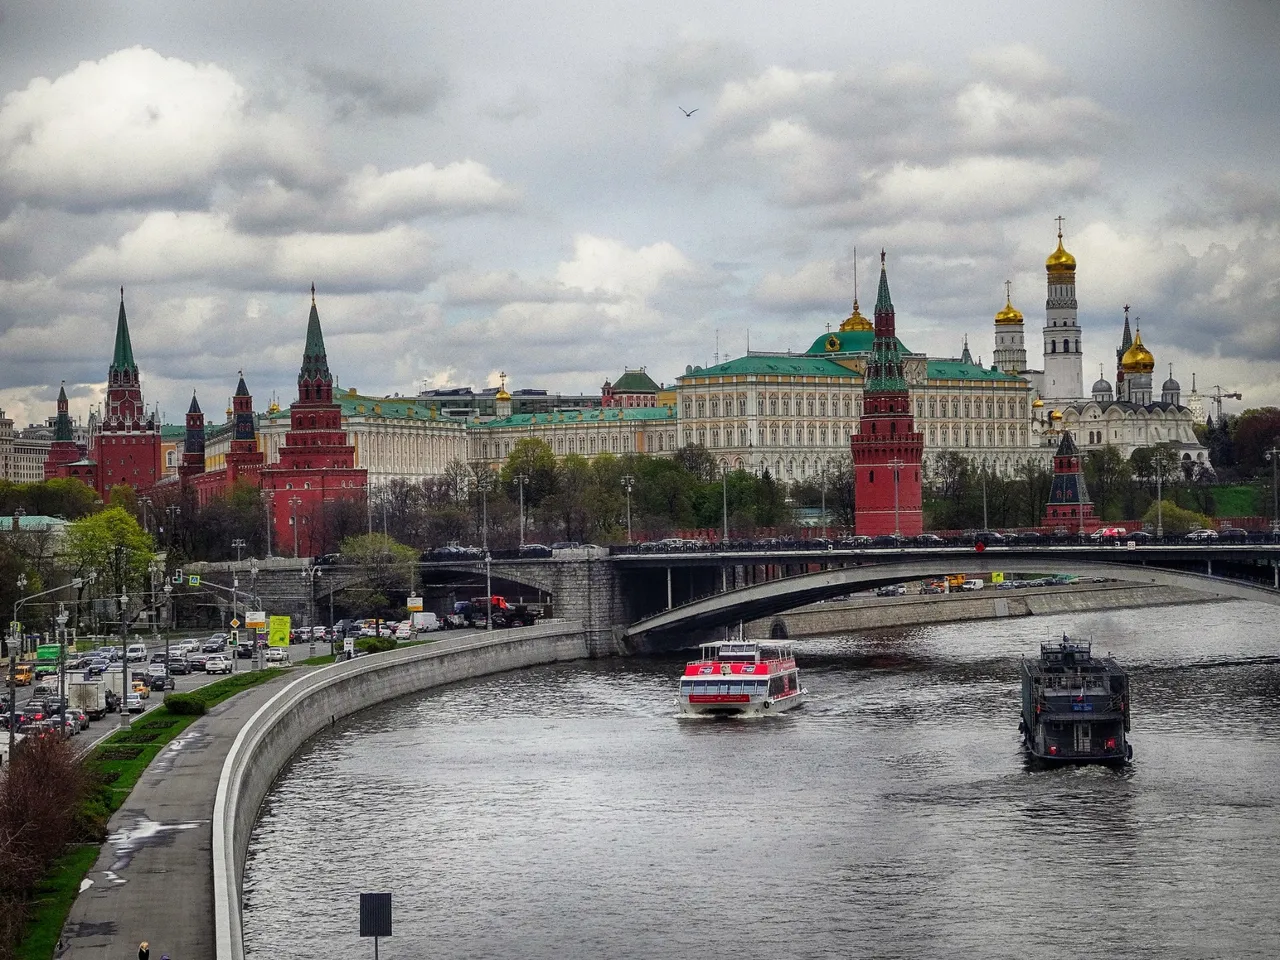 On a bridge over the Moskwa